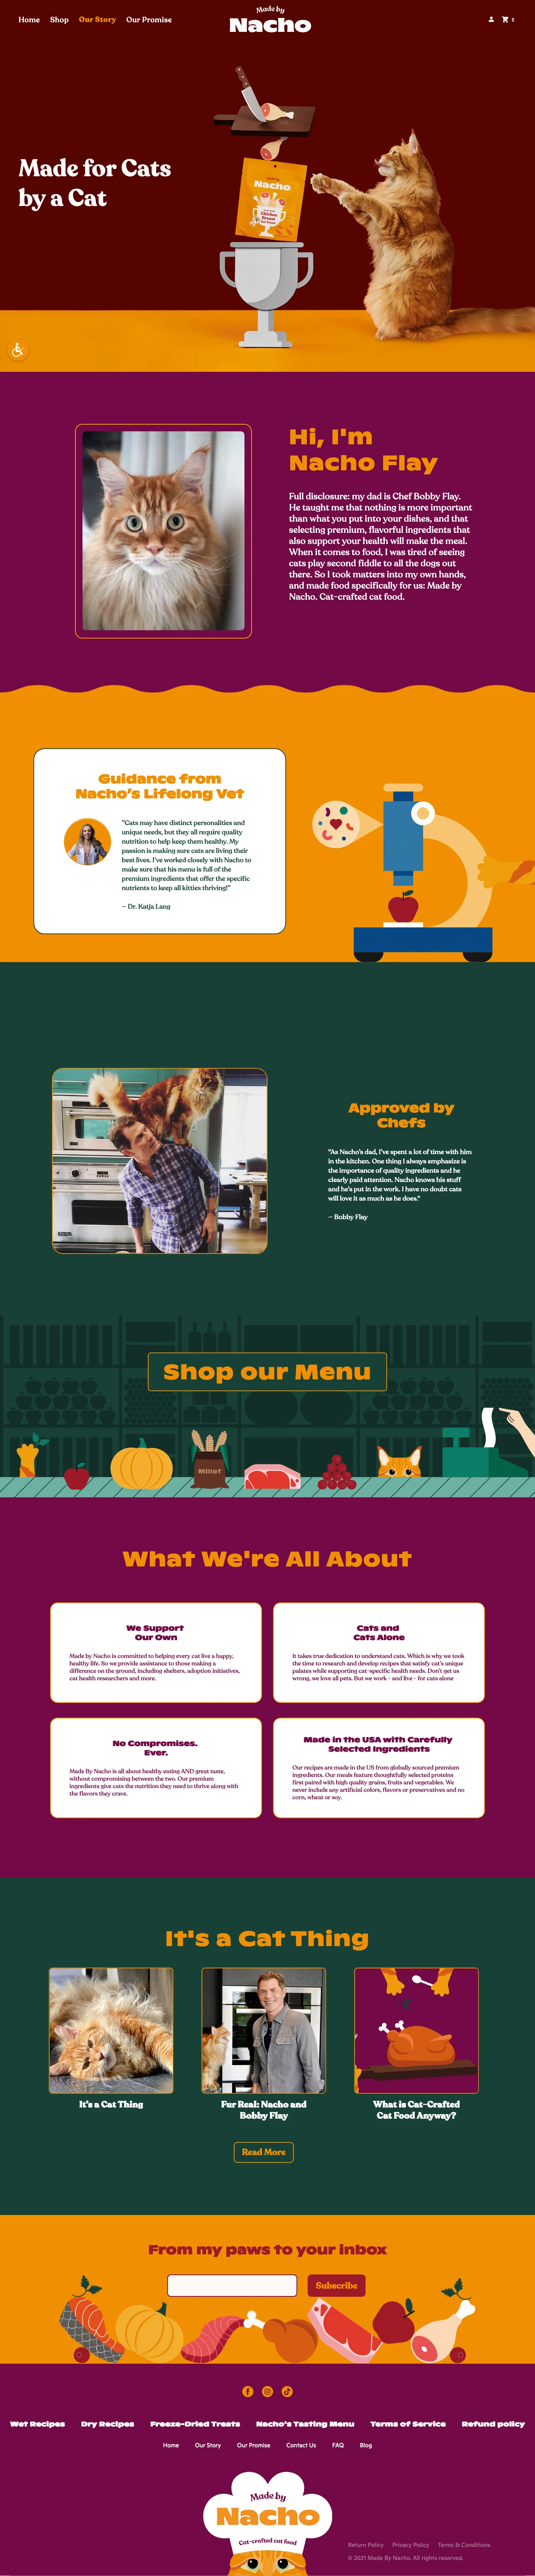 Made by Nacho Landing Page Example: Made by Nacho is Crafted in the USA. Using the finest globally sourced ingredients. We promise that every one of our recipes delivers great taste and total cat-specific nutrition.